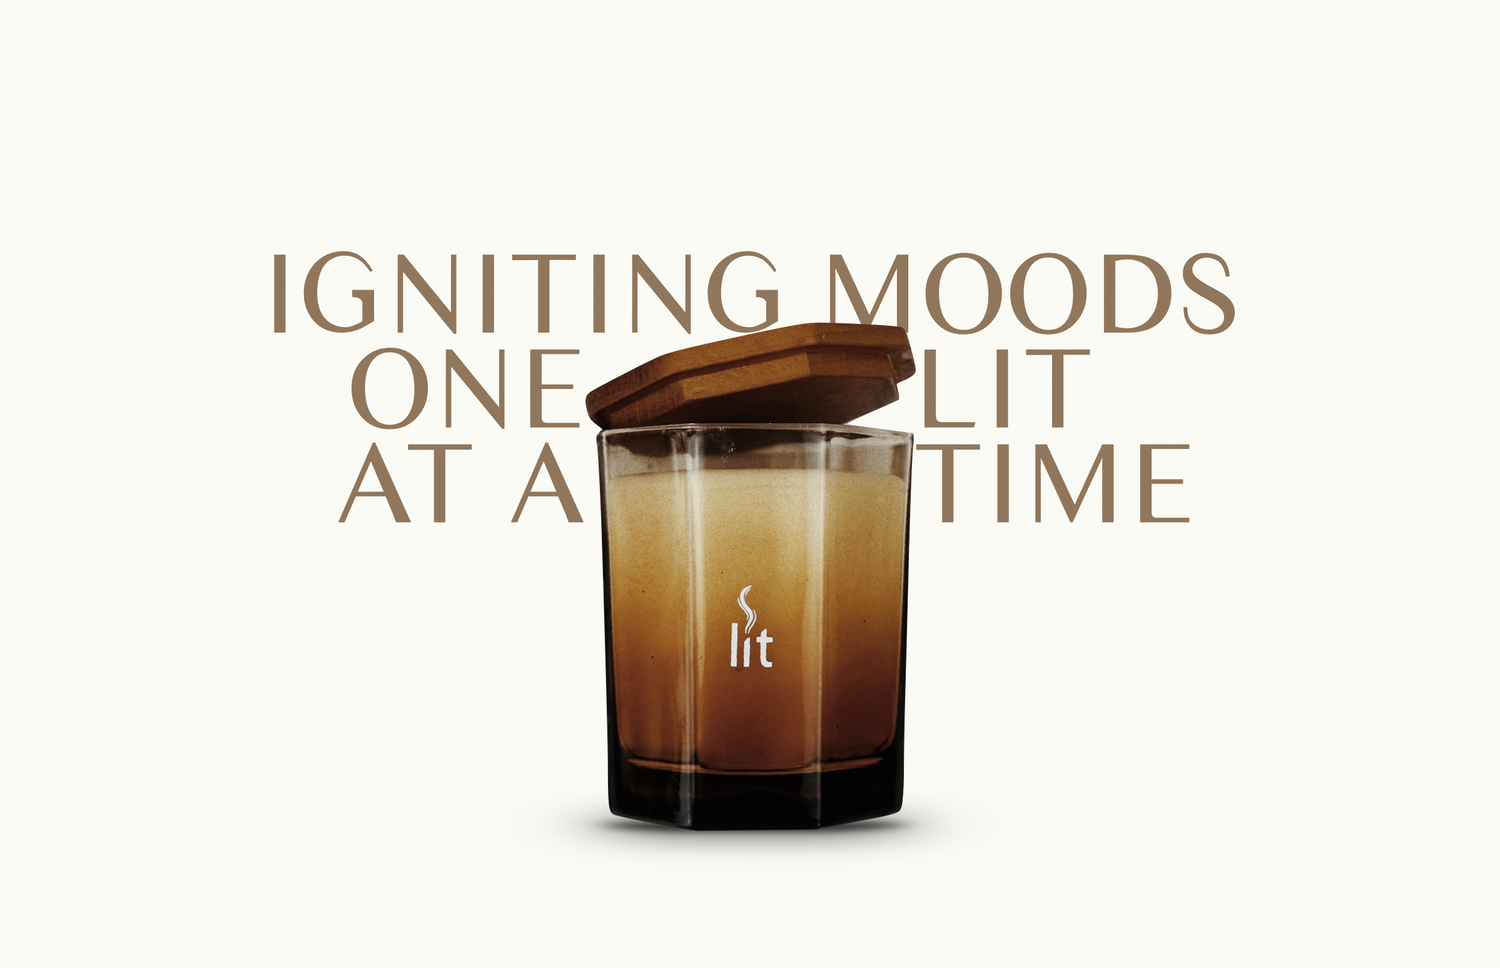 Igniting moods one lit at a time. Scented candles, room sprays, reed diffusers and more.